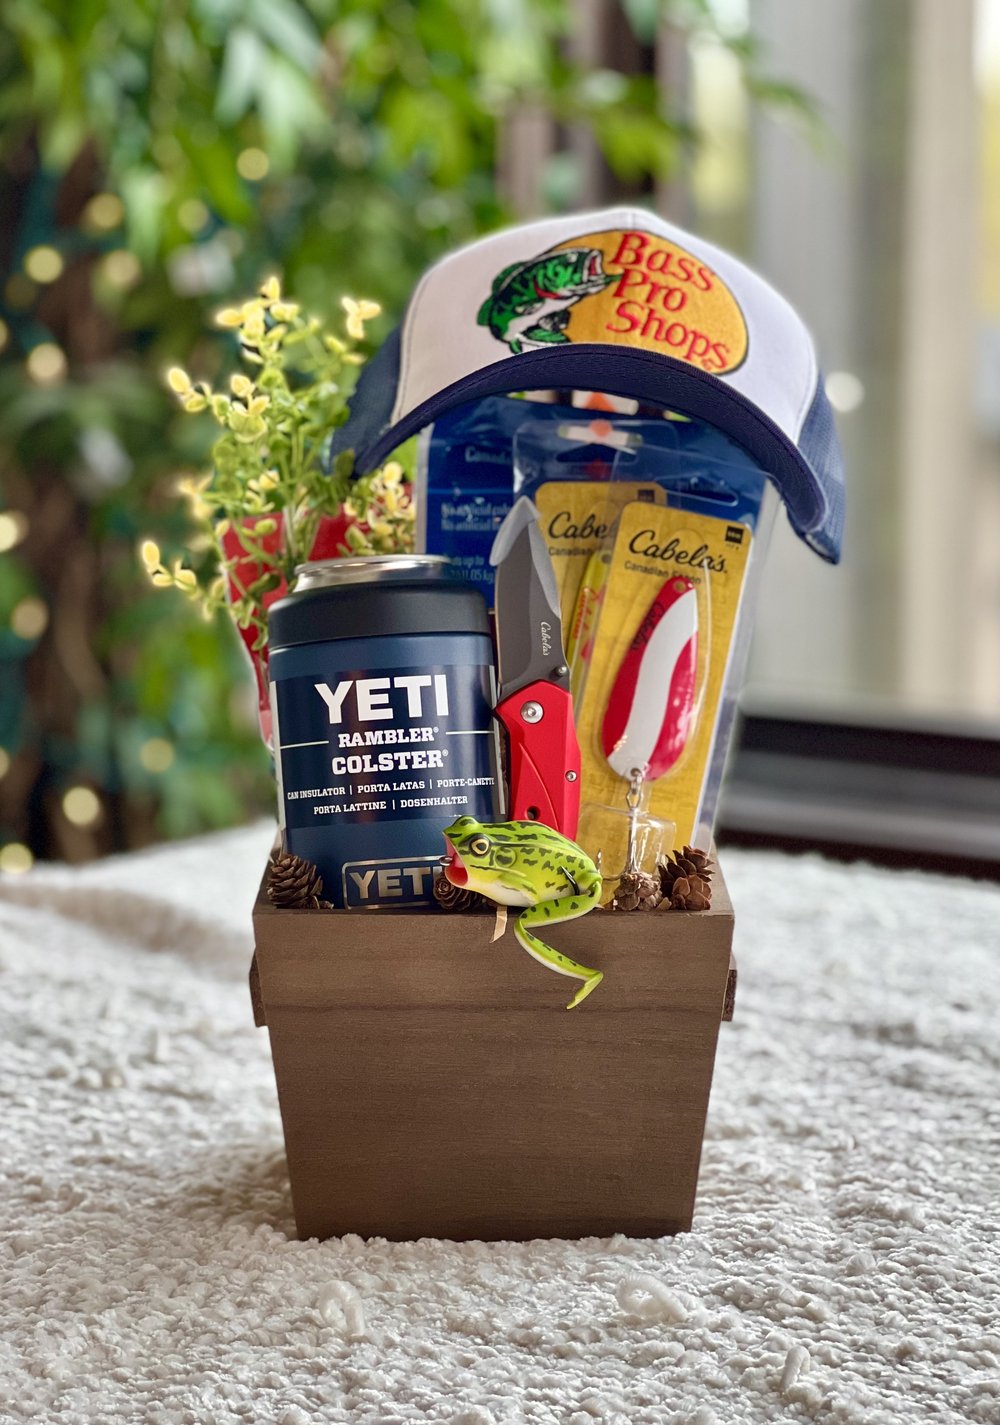 Fish Bait and Tackle — Give Love Baskets